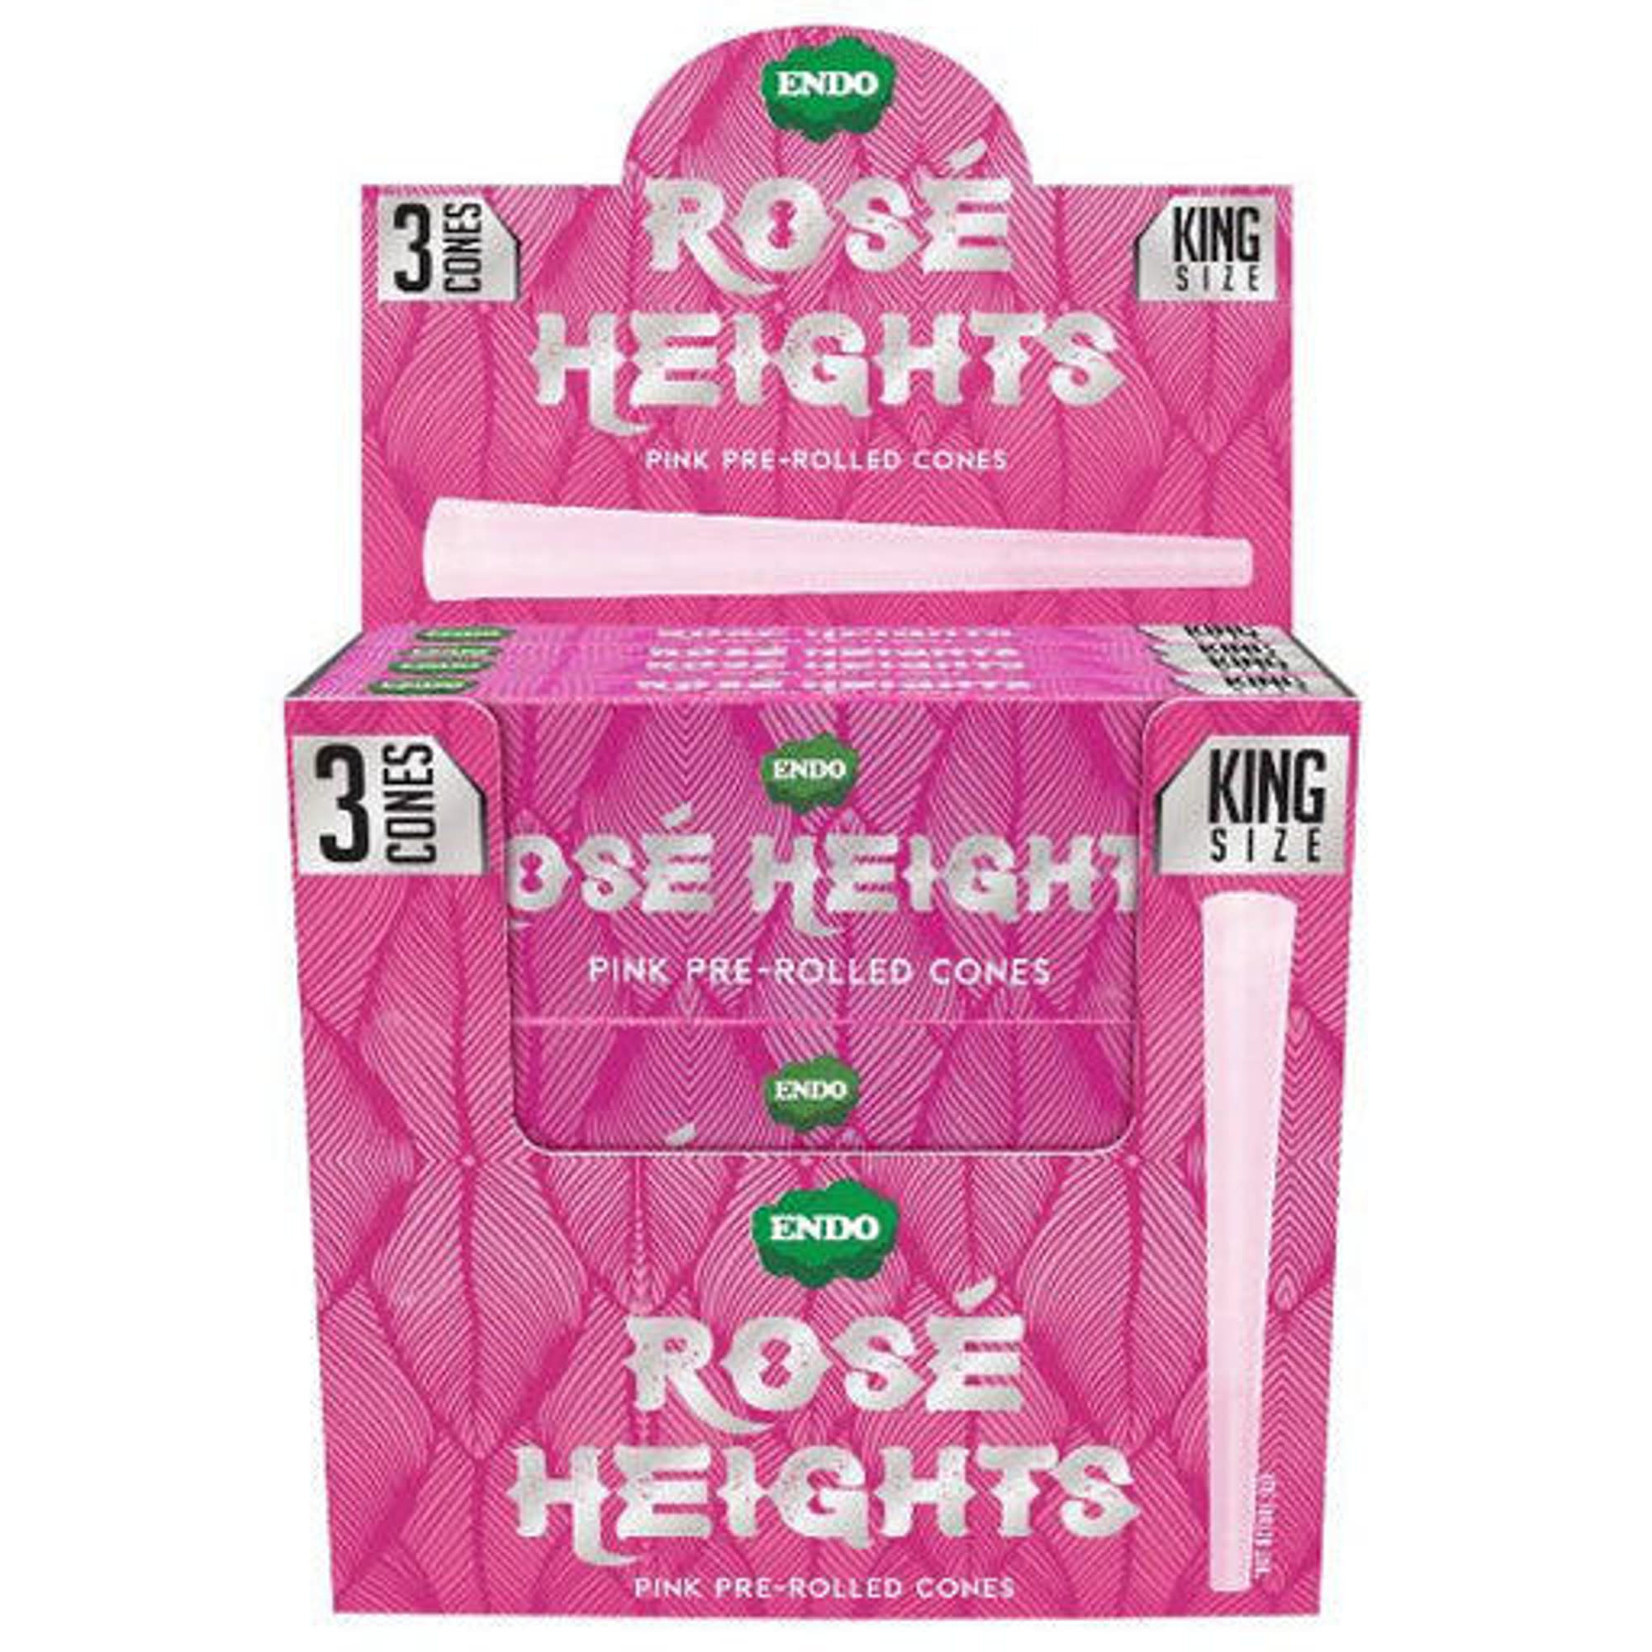 Endo Rose Endo Rose Heights  Pink Pre-Rolled Cone Rolling Paper